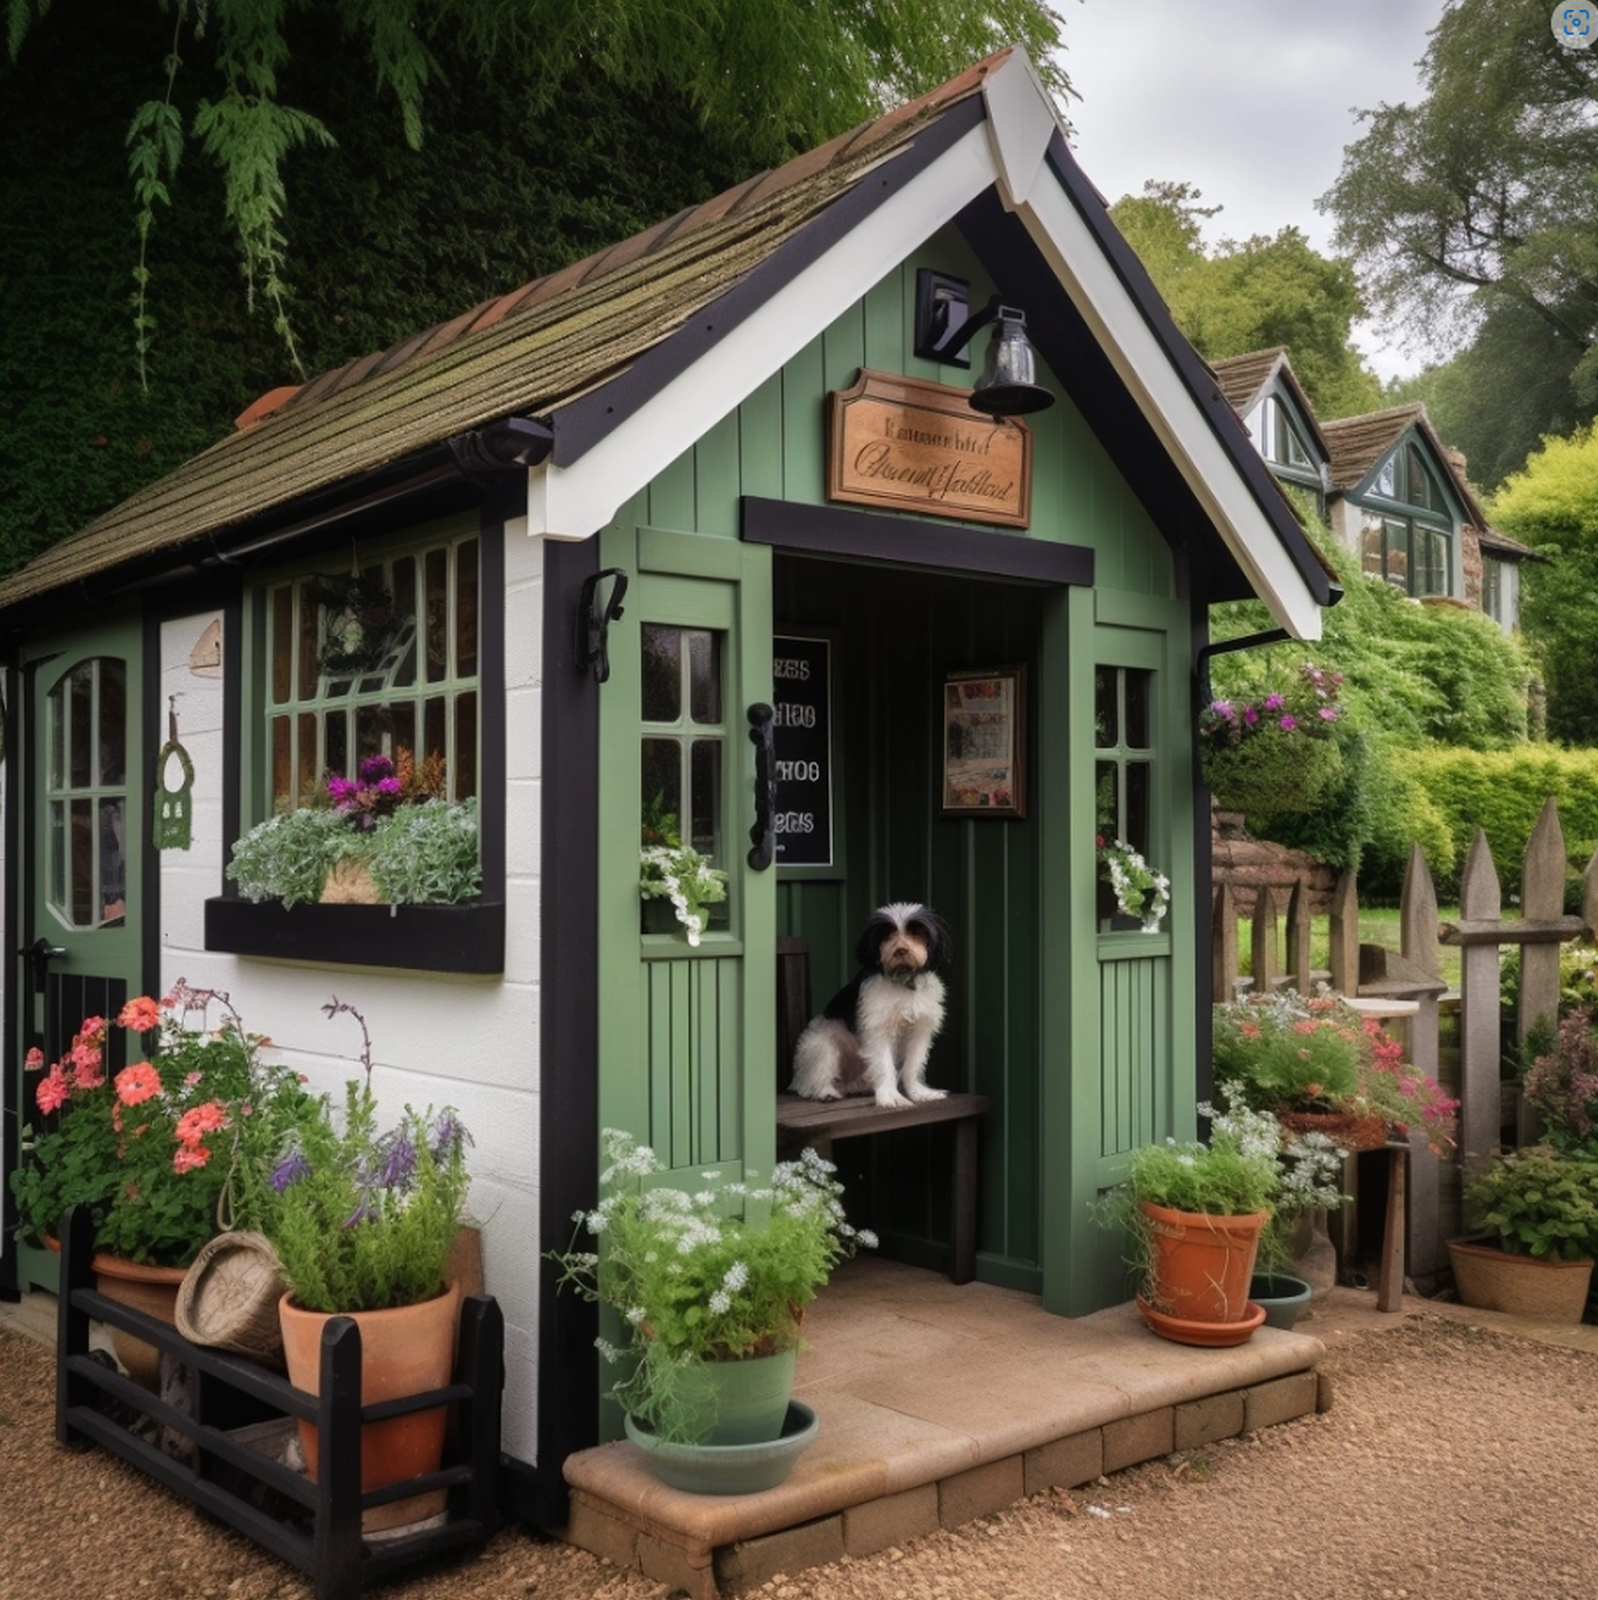 A green and white decorated chic garden shed with a dog stood on the porch